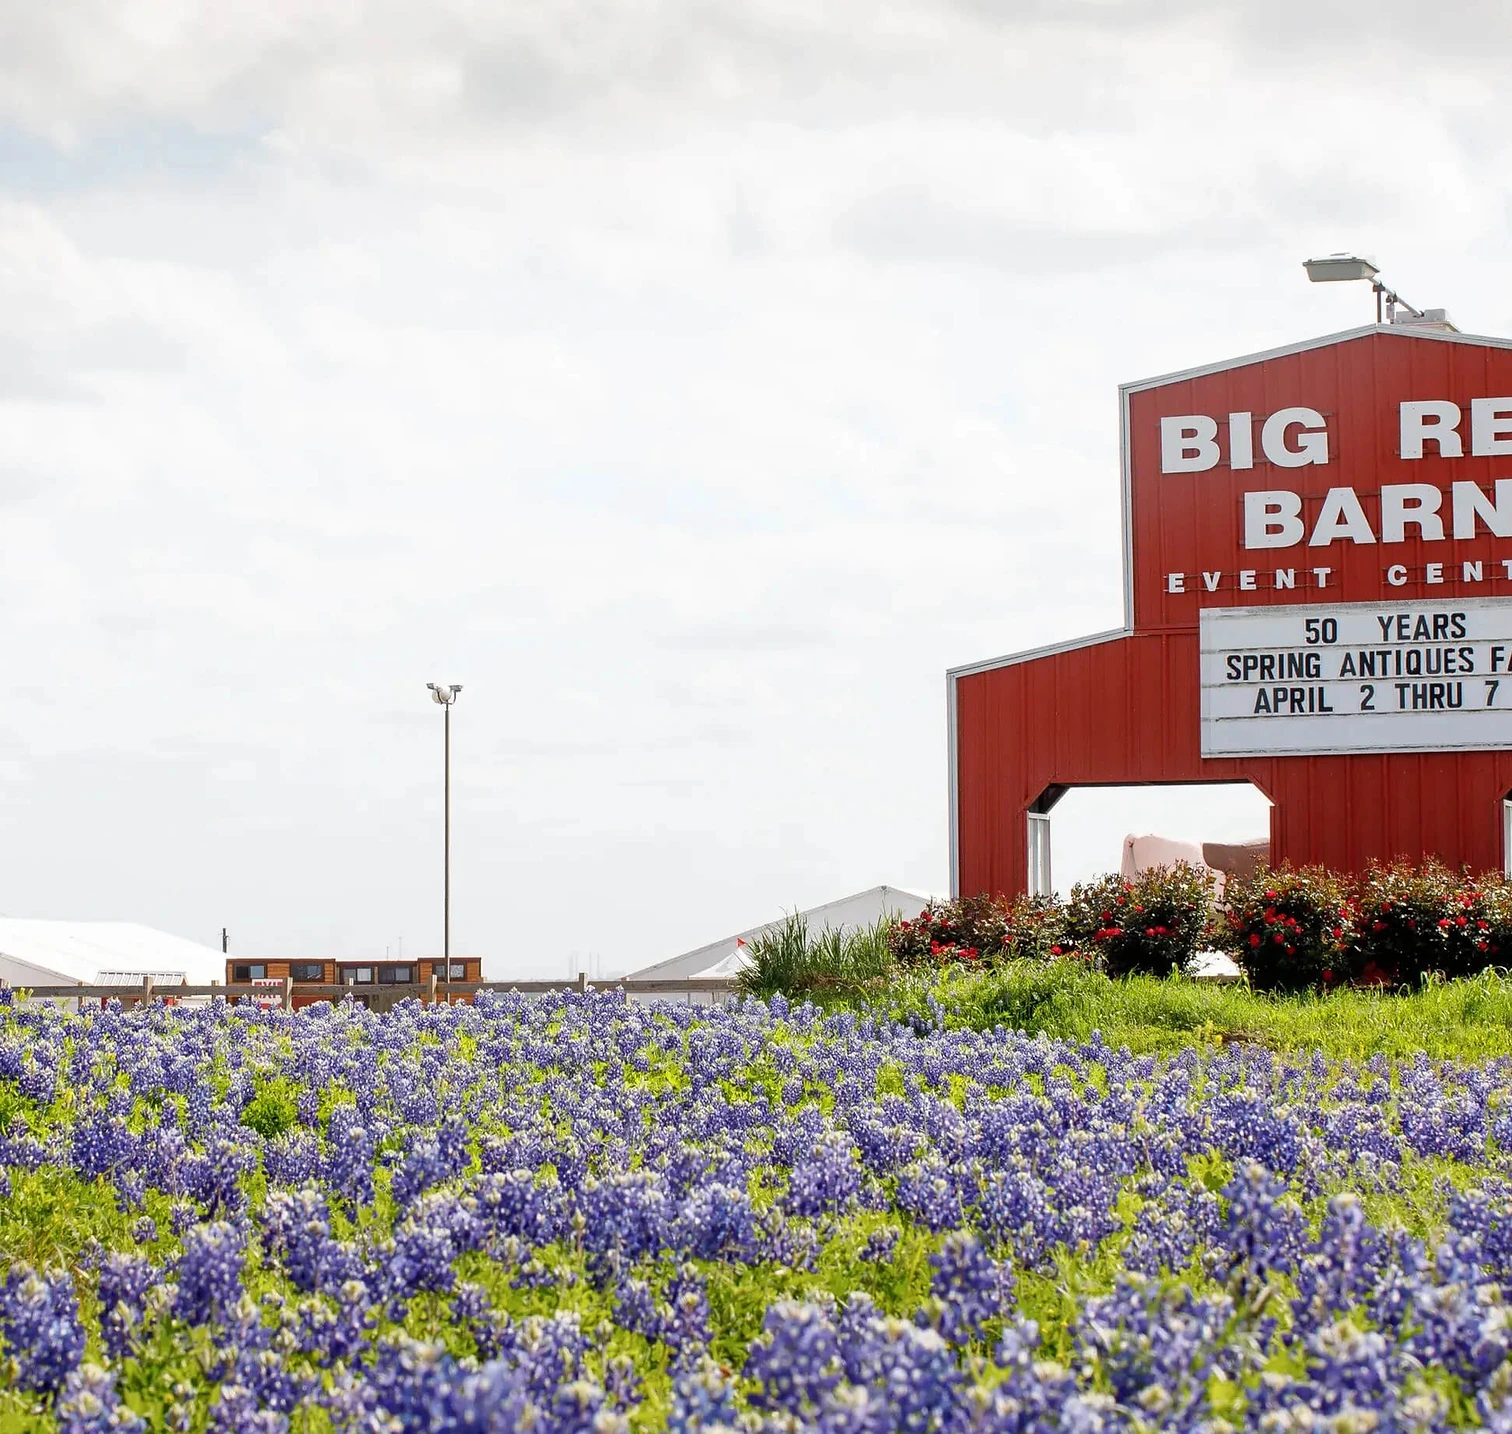 Big red barn at Round Top Antiques Fair